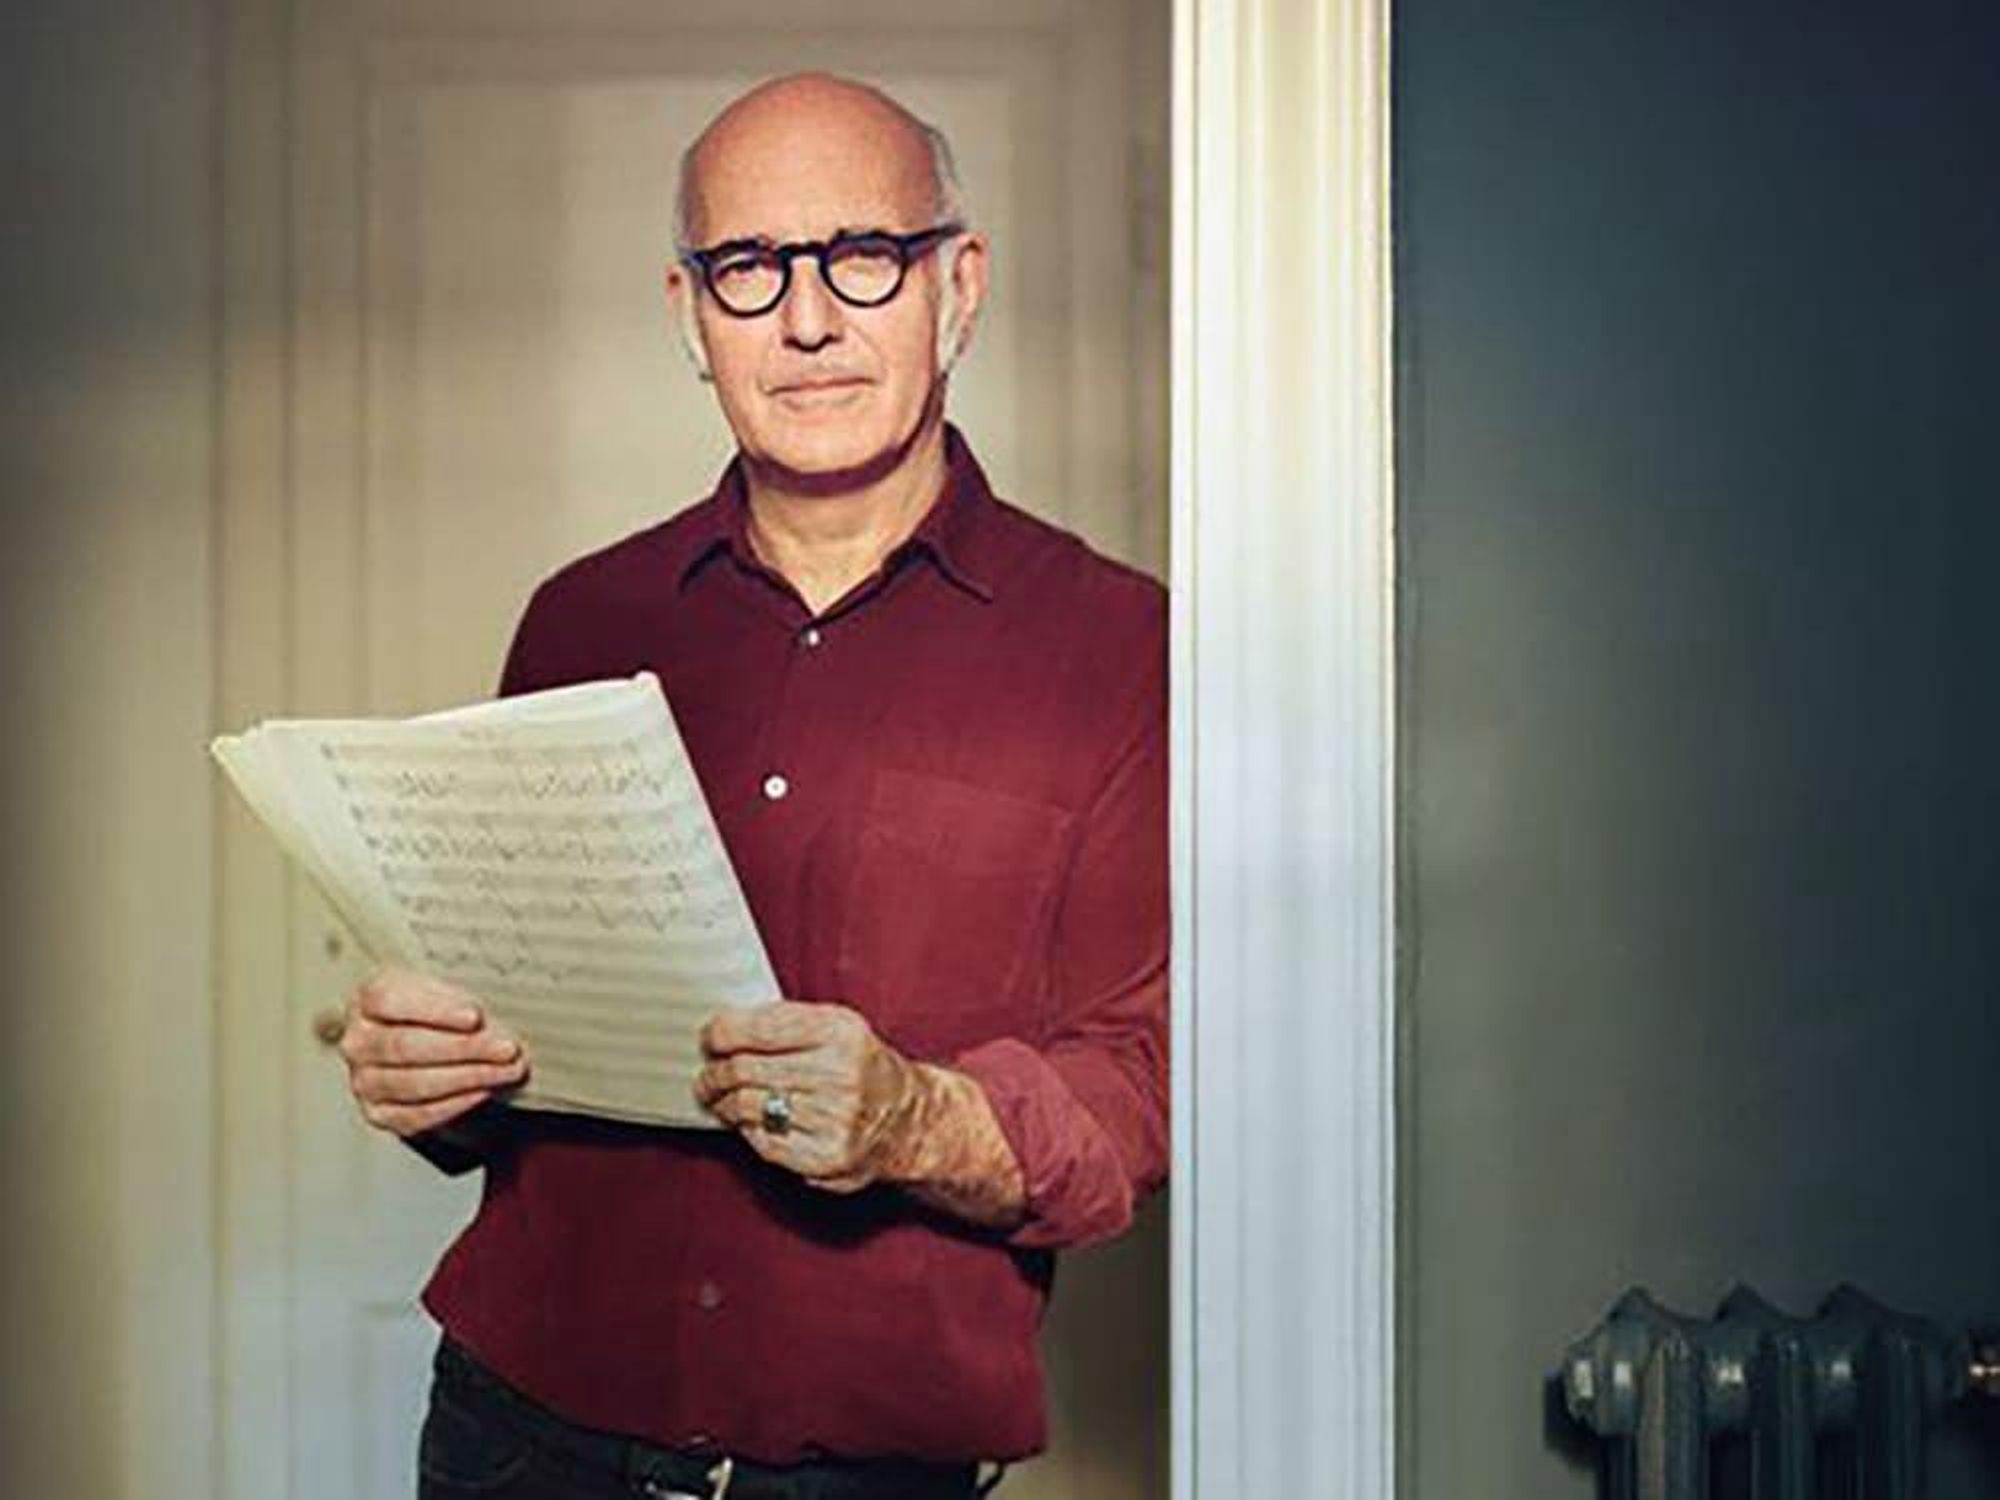 Classical superstar Ludovico Einaudi to play special one-night